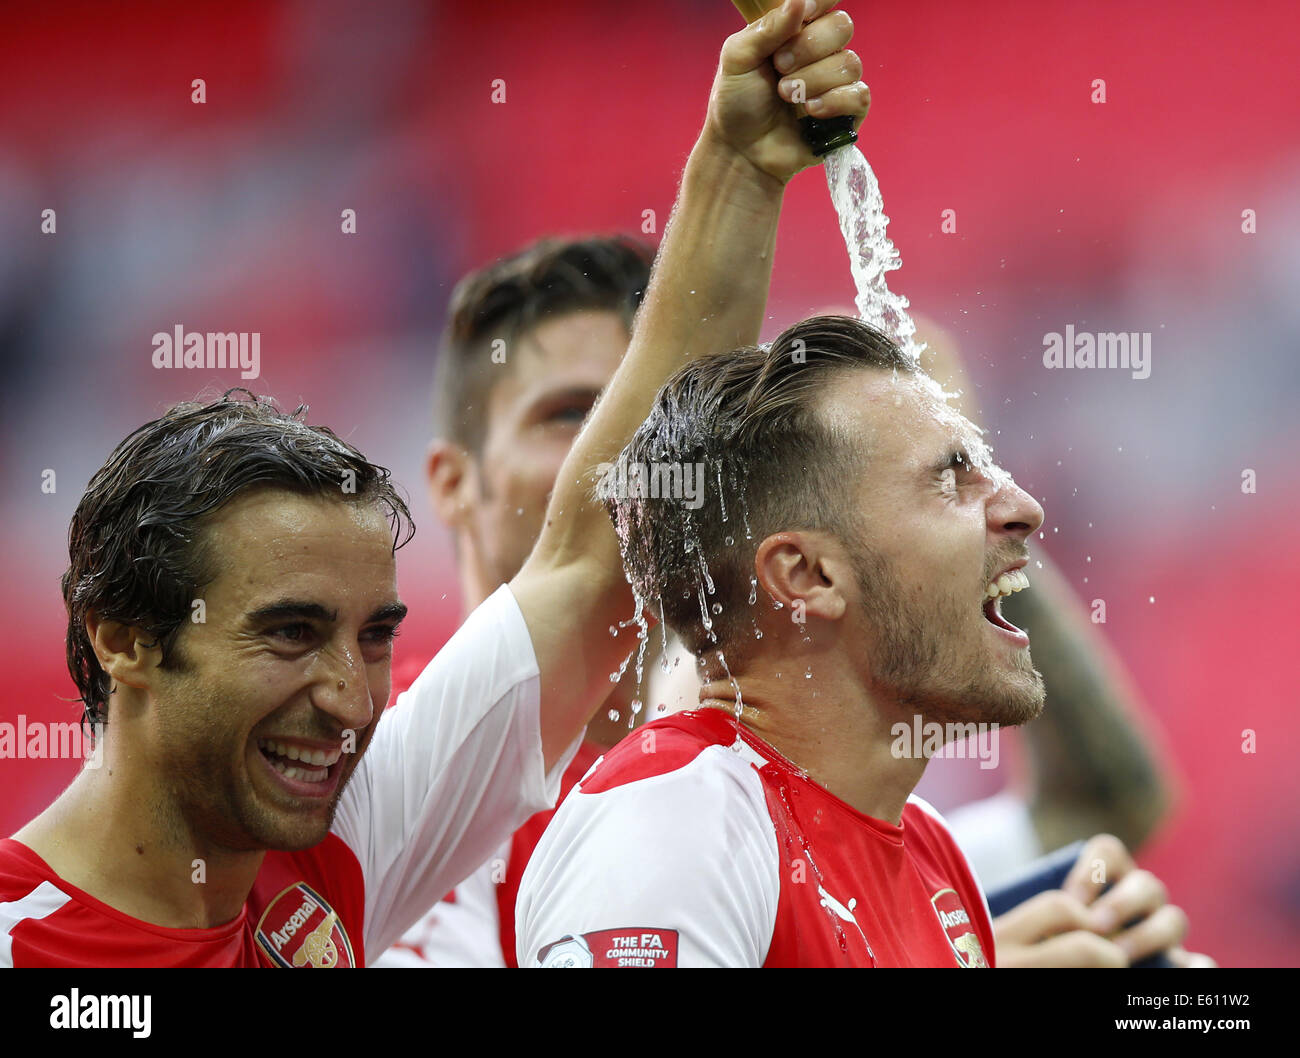 London, UK. 10th Aug, 2014. Mathieu Flamini(L) of Arsenal celebrates by spraying champagne towards his teammate Aaron Ramsey after the Community Shield match between Arsenal and Manchester City at Wembley Stadium in London, Britain on Aug. 10, 2014. Arsenal won 3-0. Credit:  Wang Lili/Xinhua/Alamy Live News Stock Photo